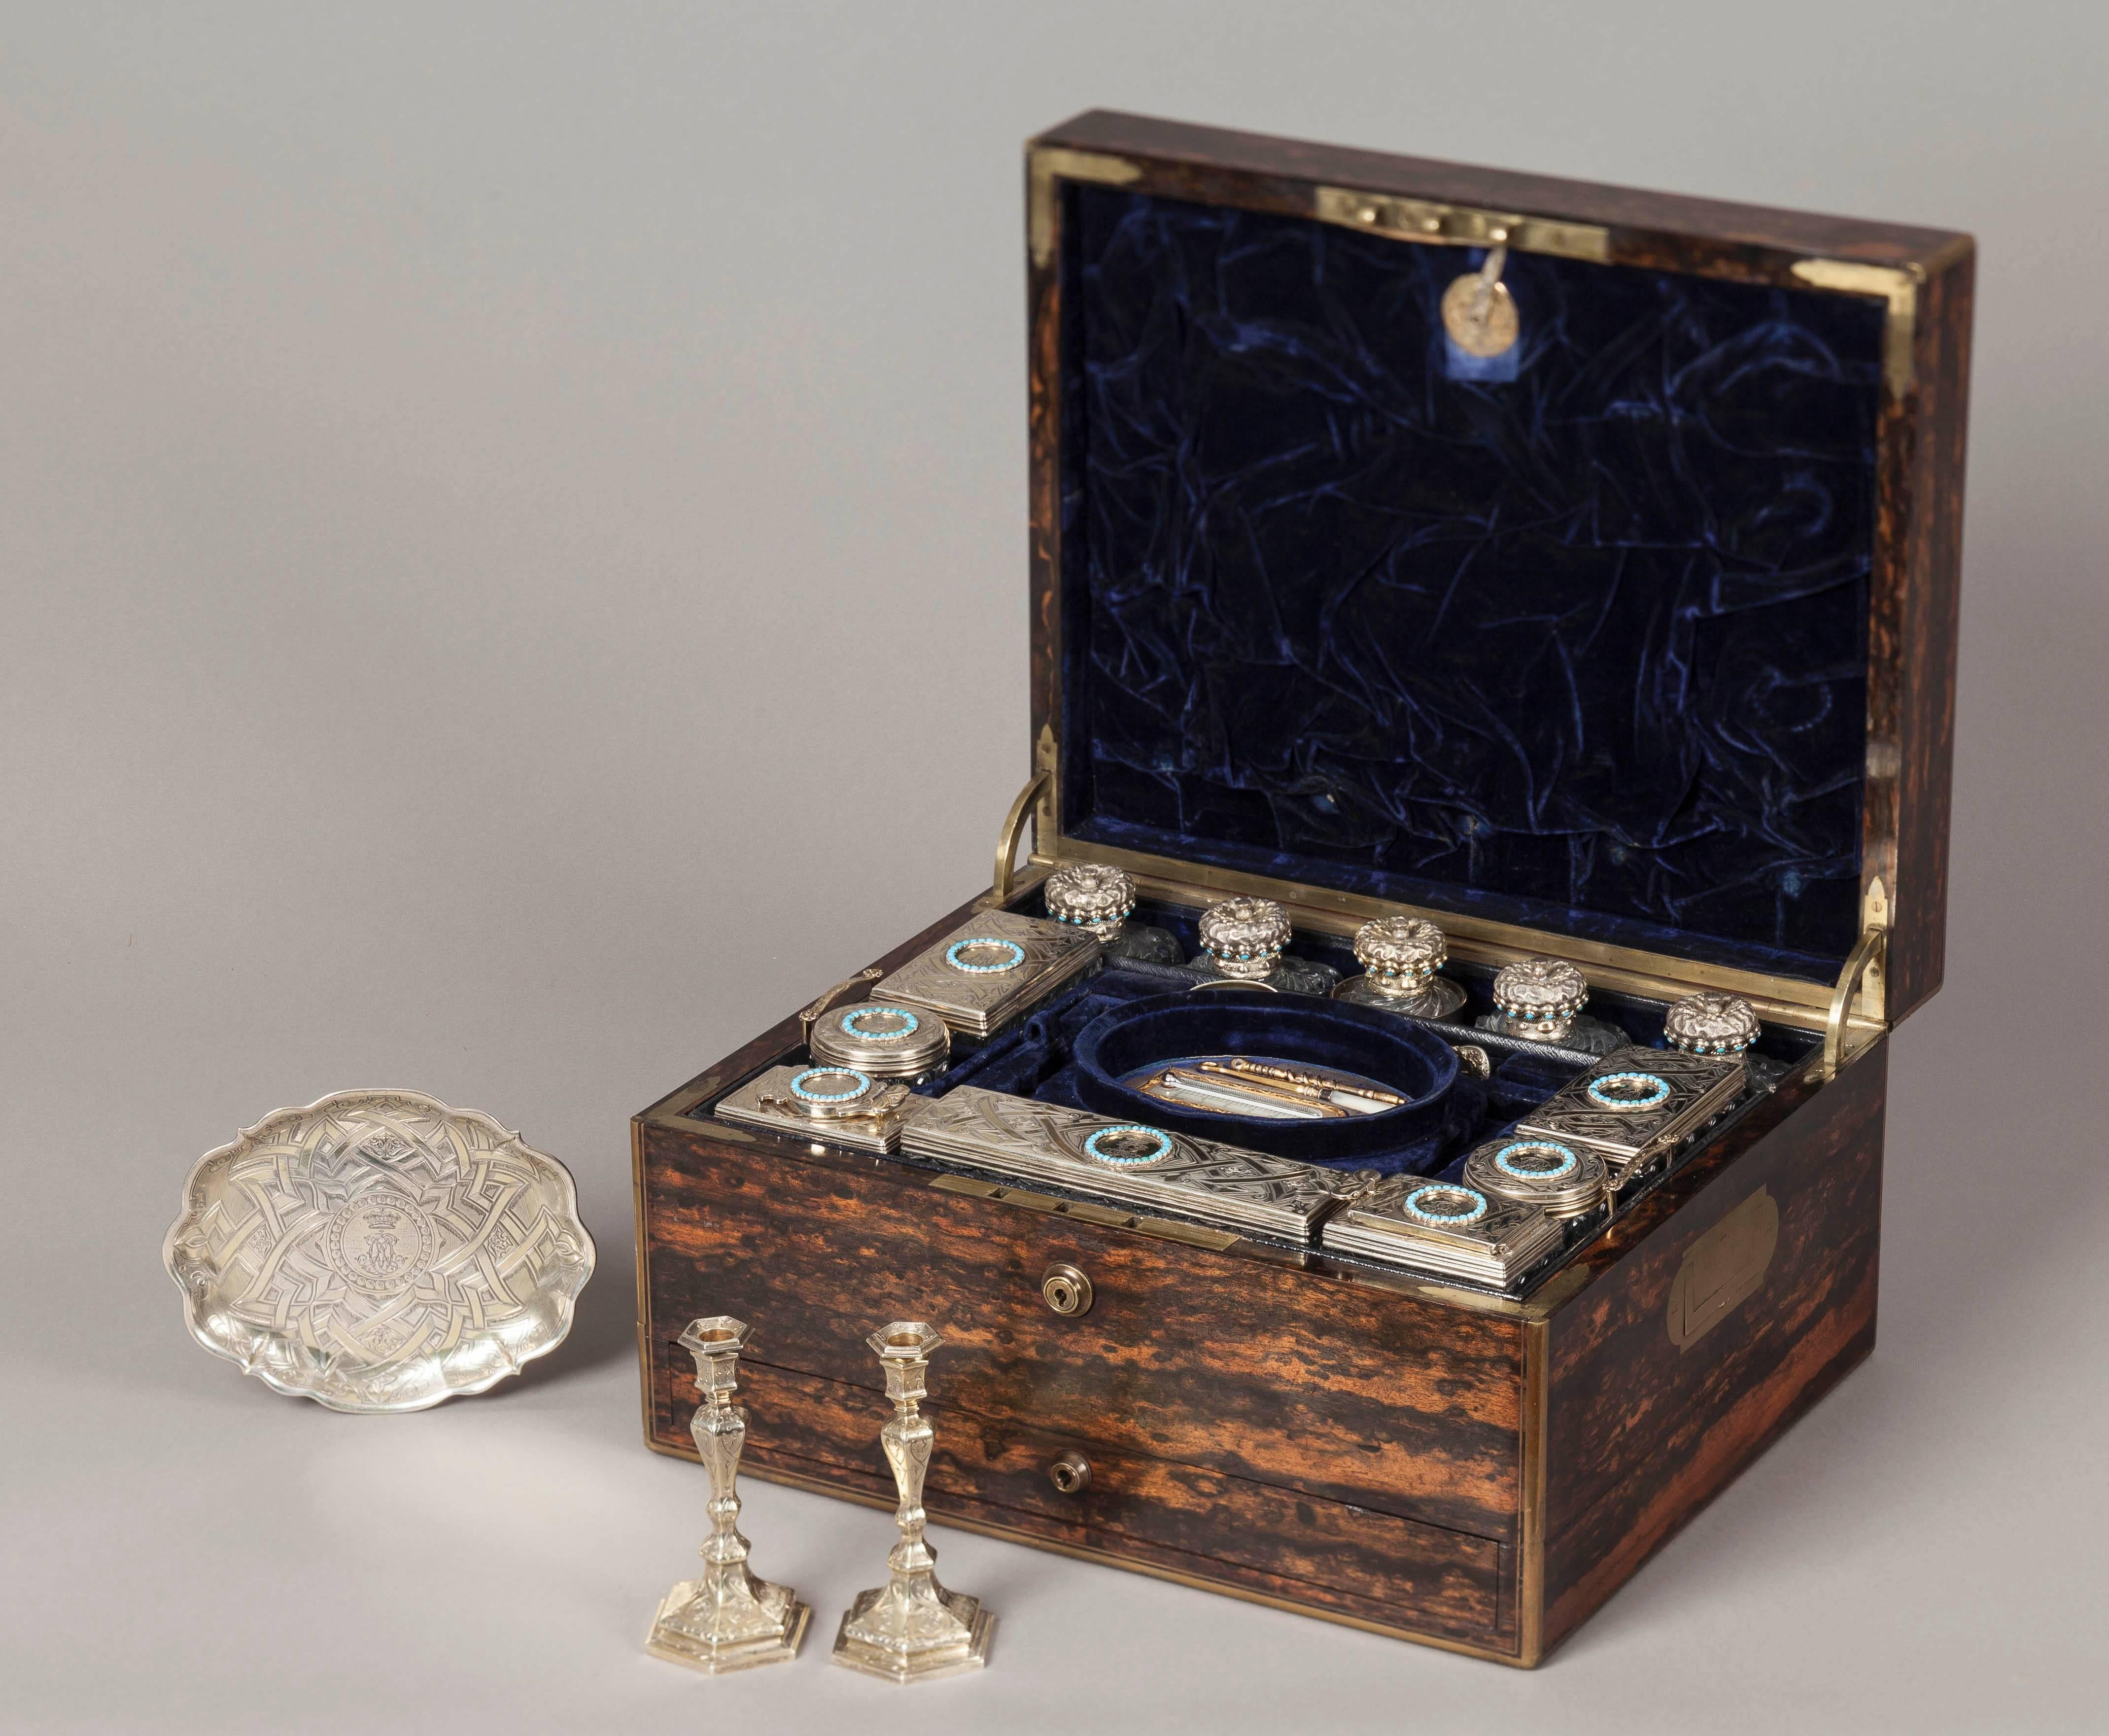 A mid-19th century lady’s travelling dressing case.

The case is constructed in a finely marked coromandel, with inset brass handles and brass guard bands to the angles. The hinged lid rises to reveal in the upper section, a drop down document